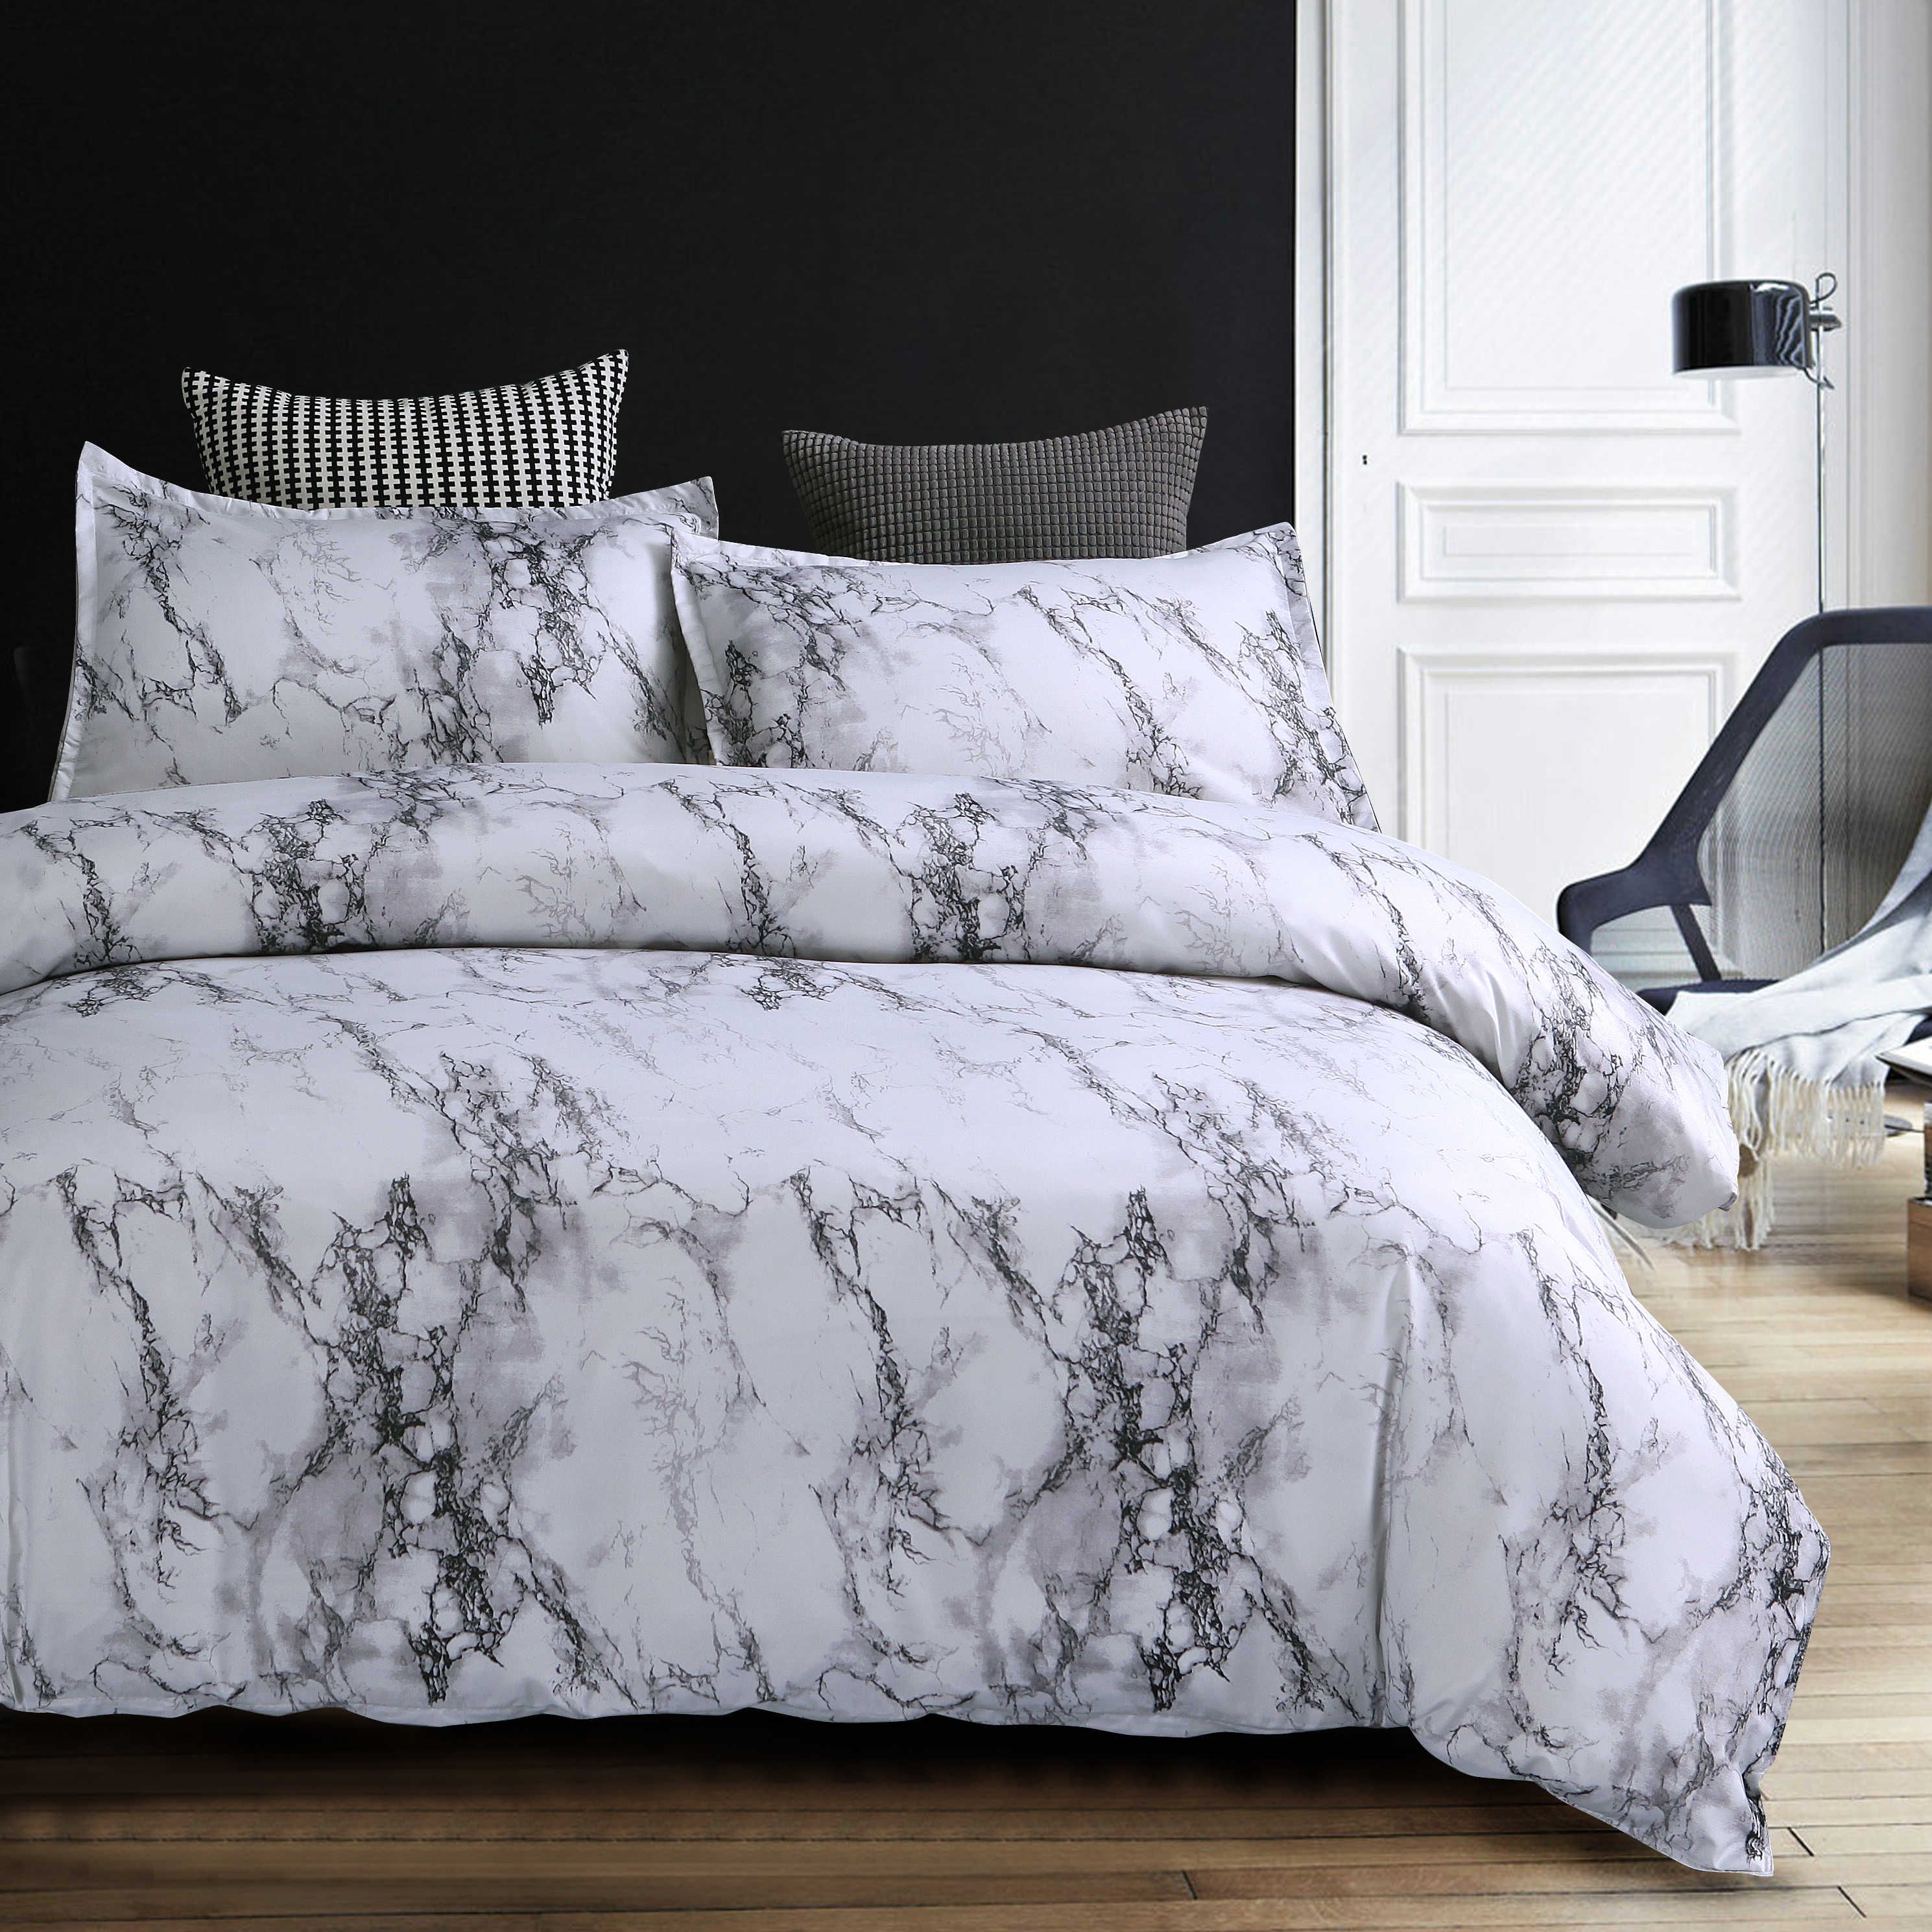 2020 Lucky King Size Gray White Marble Texture Pattern Duvet Cover